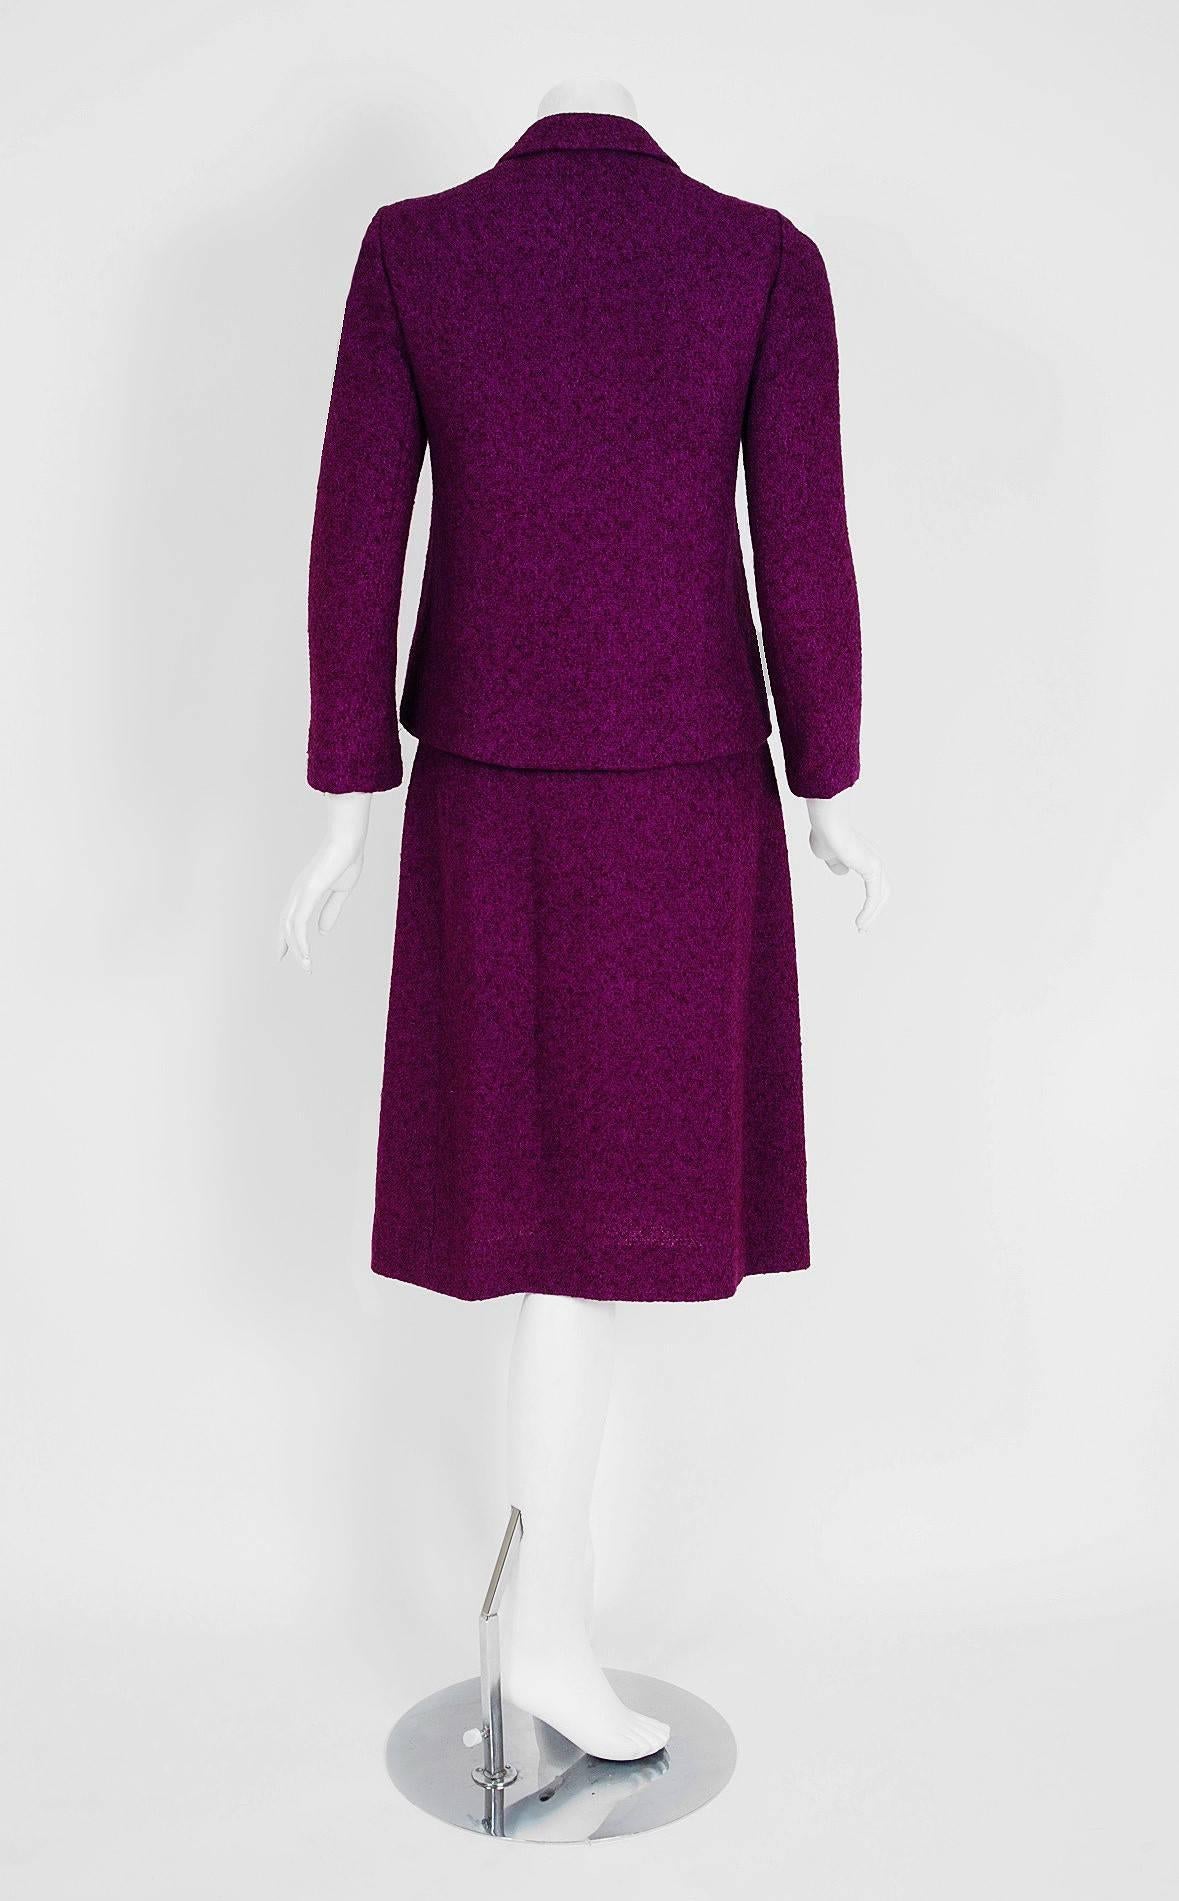 Women's 1967 Balenciaga Haute-Couture Royal Purple Wool Double-Breasted Mod Skirt Suit 